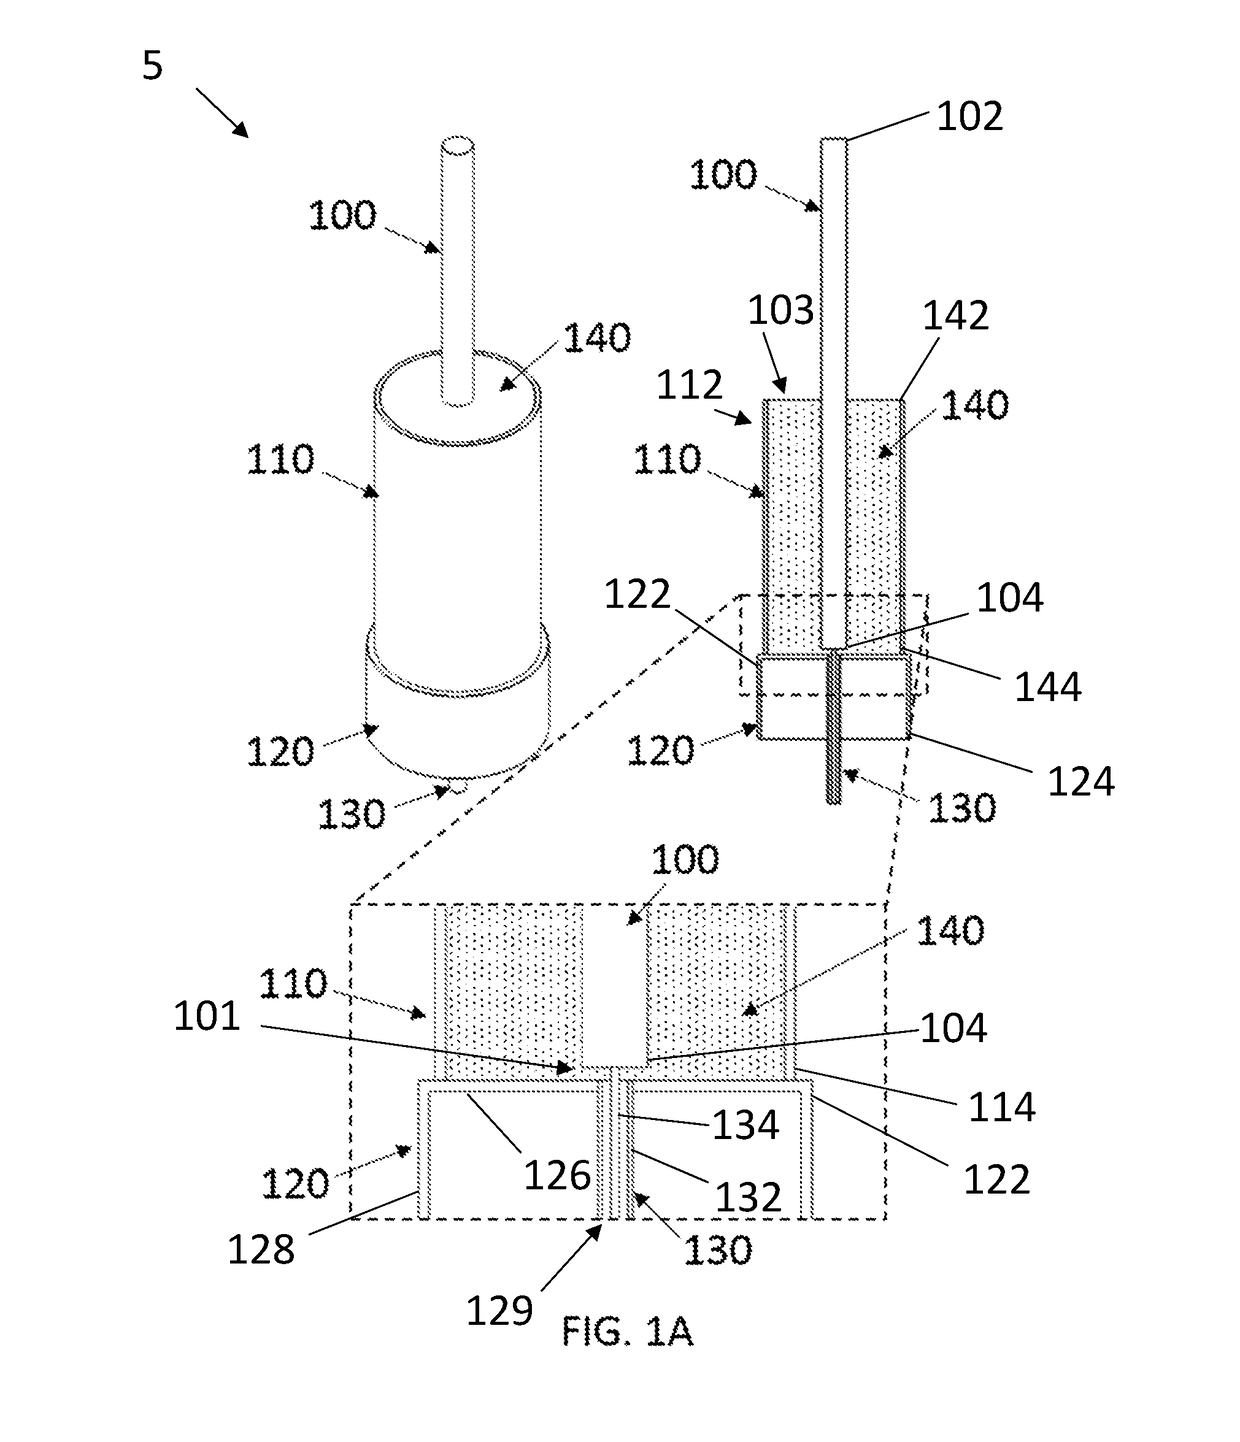 Sleeve monopole antenna with spatially variable dielectric loading